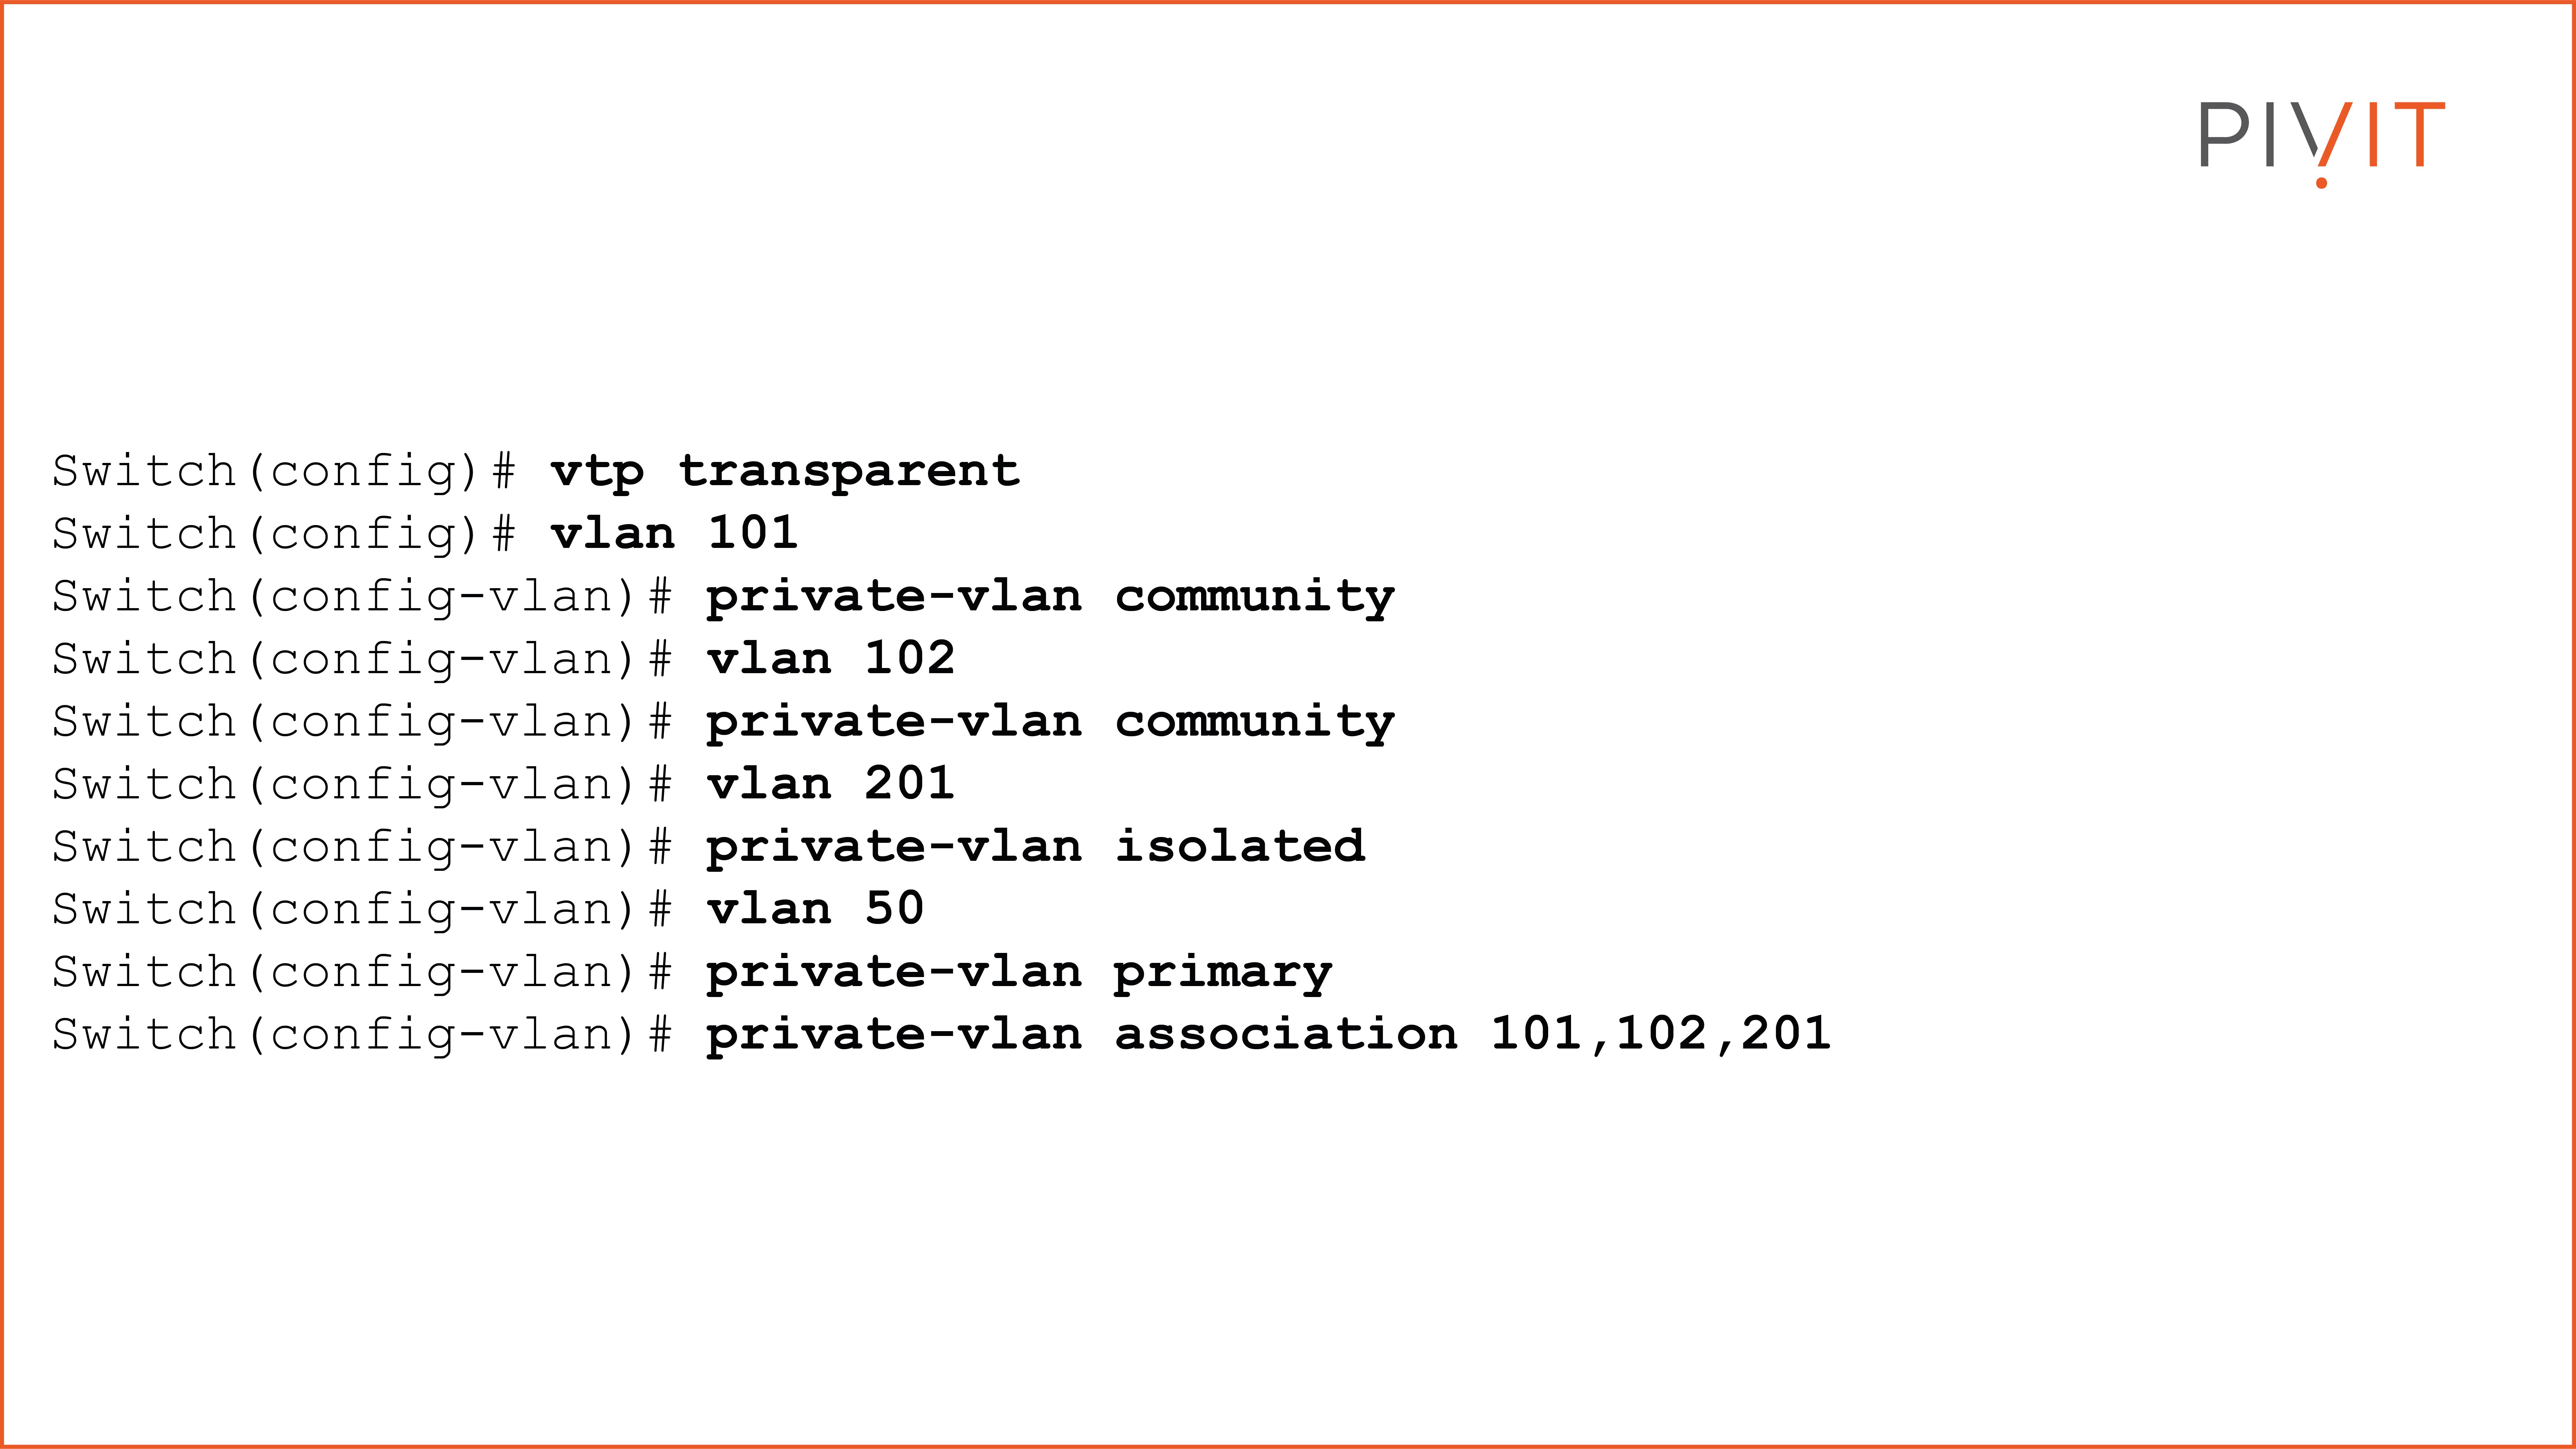 Commands to configure VLANs 101, 102, and 201 and identify them as community and isolated VLANs